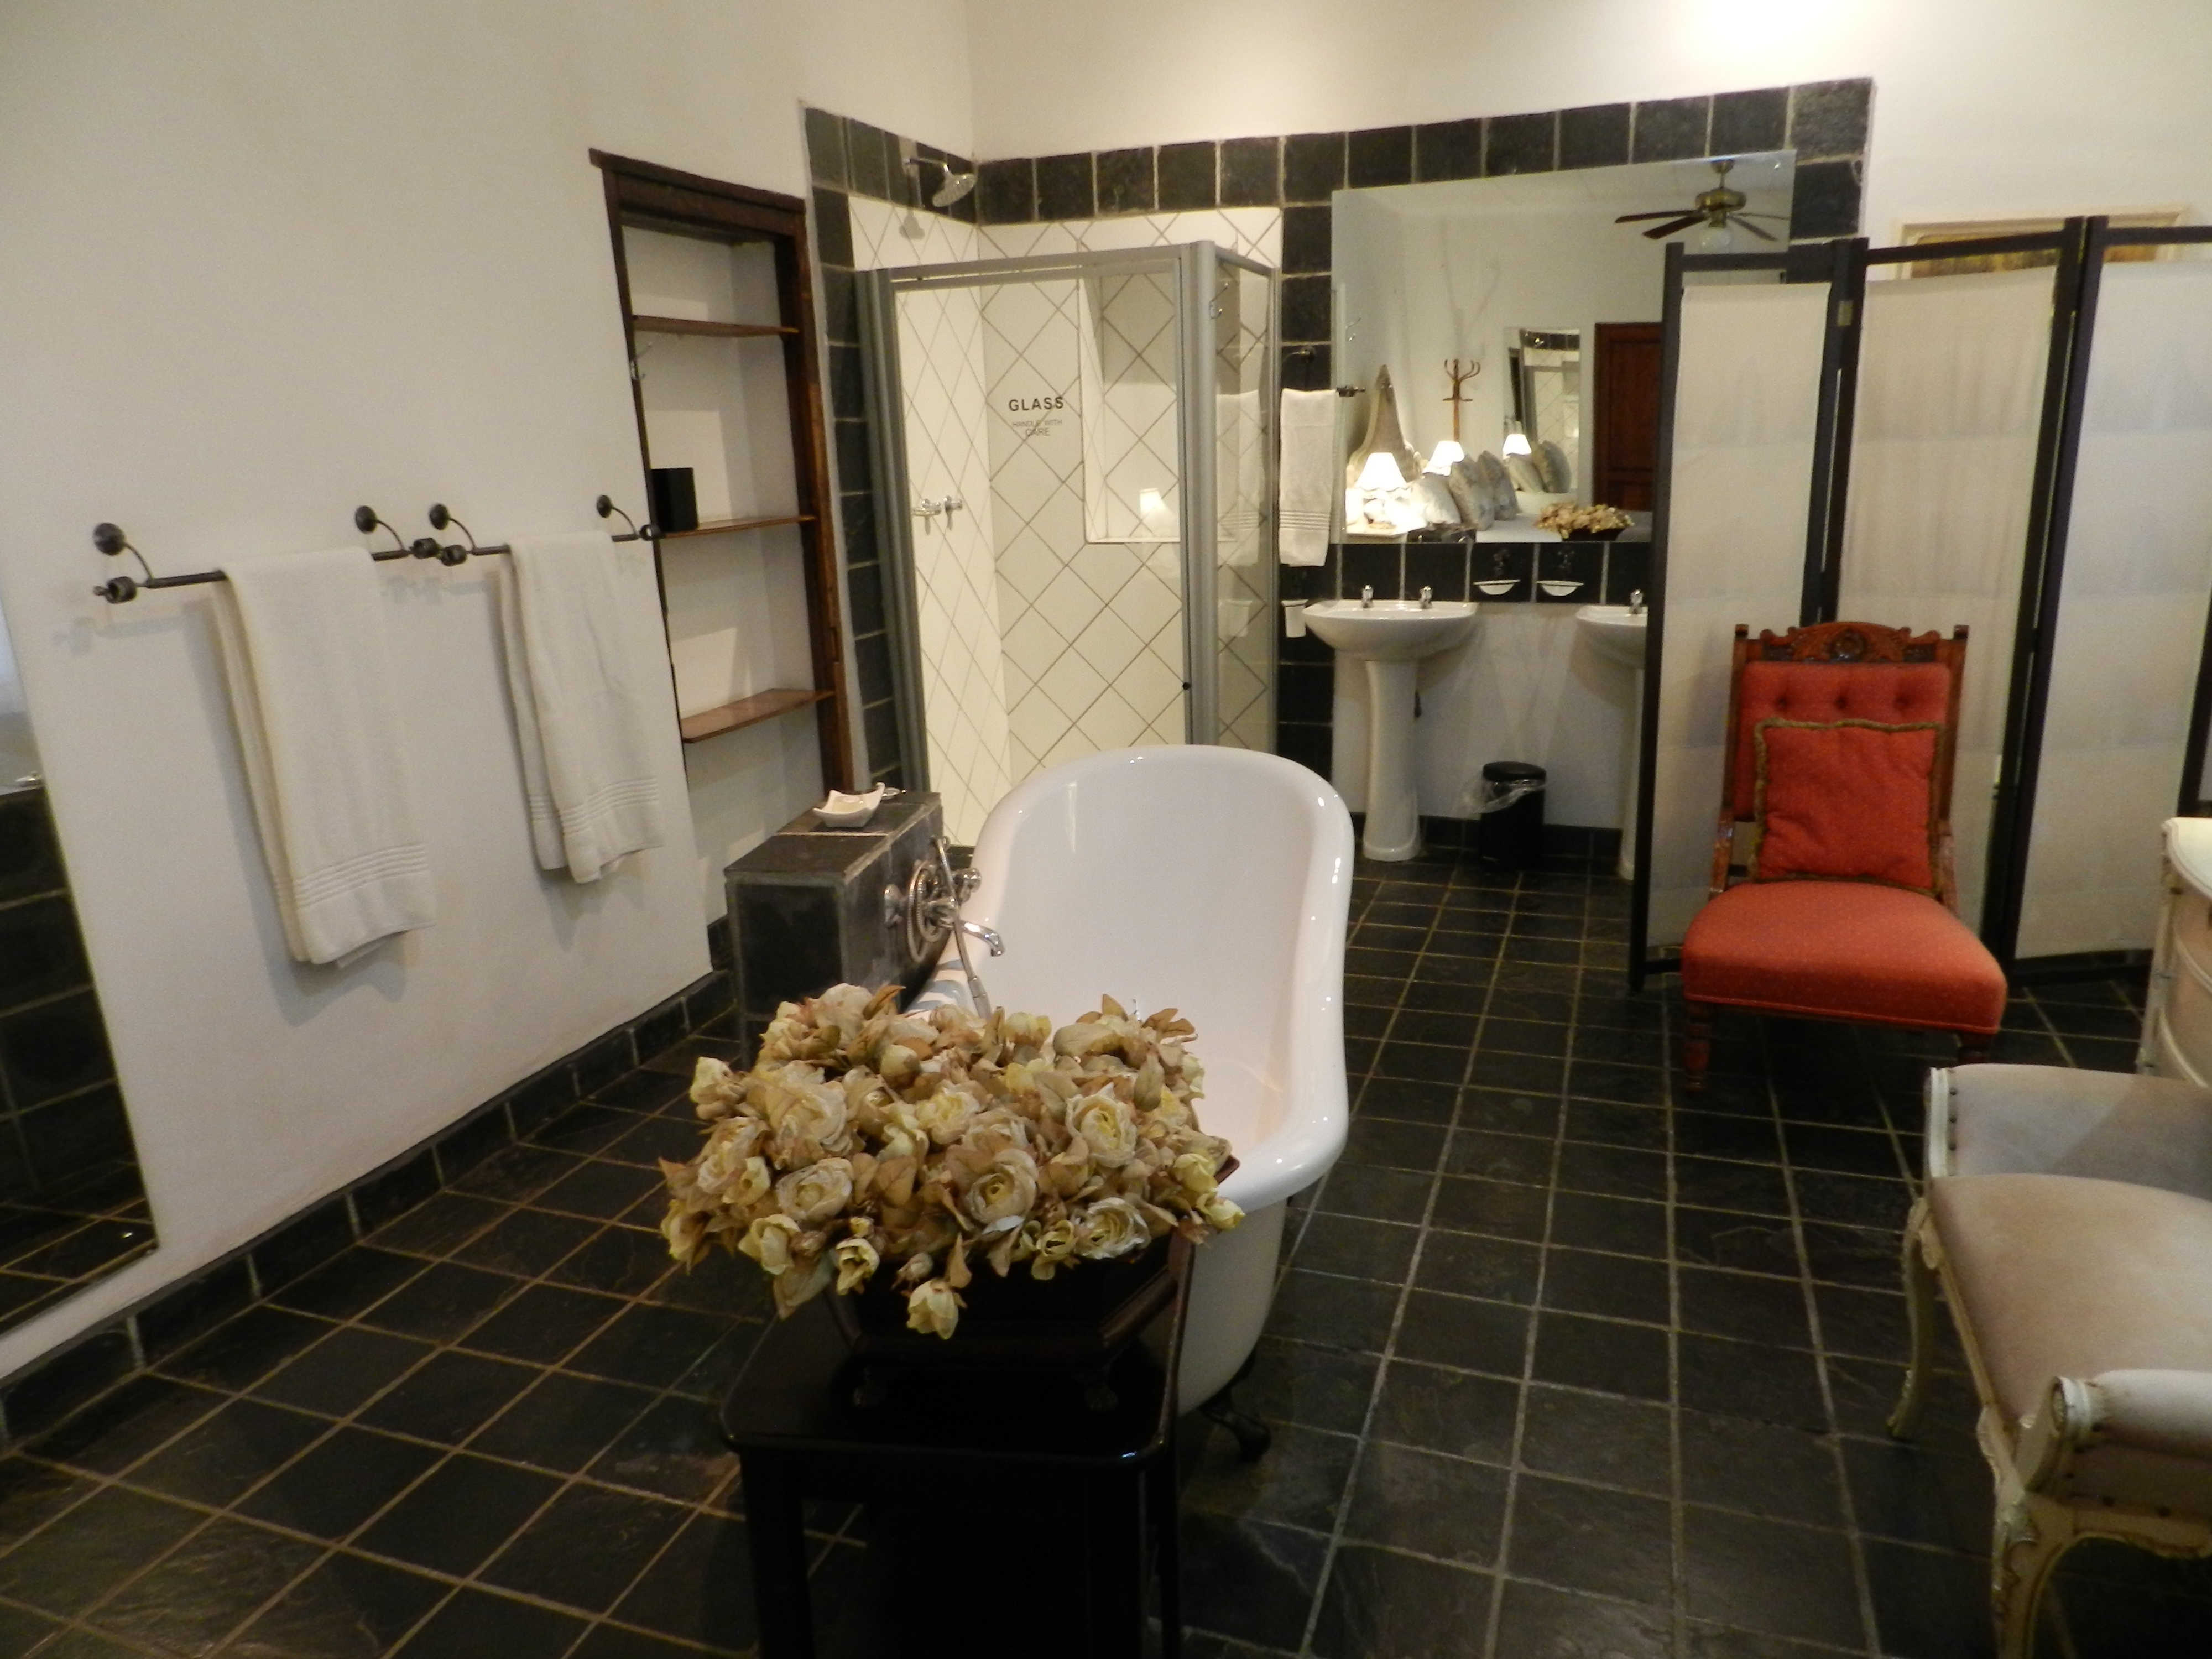 Bridal suite open bathroom with claw-foot bath and shower, towels provided, at the President Paul Kruger Guest Lodge